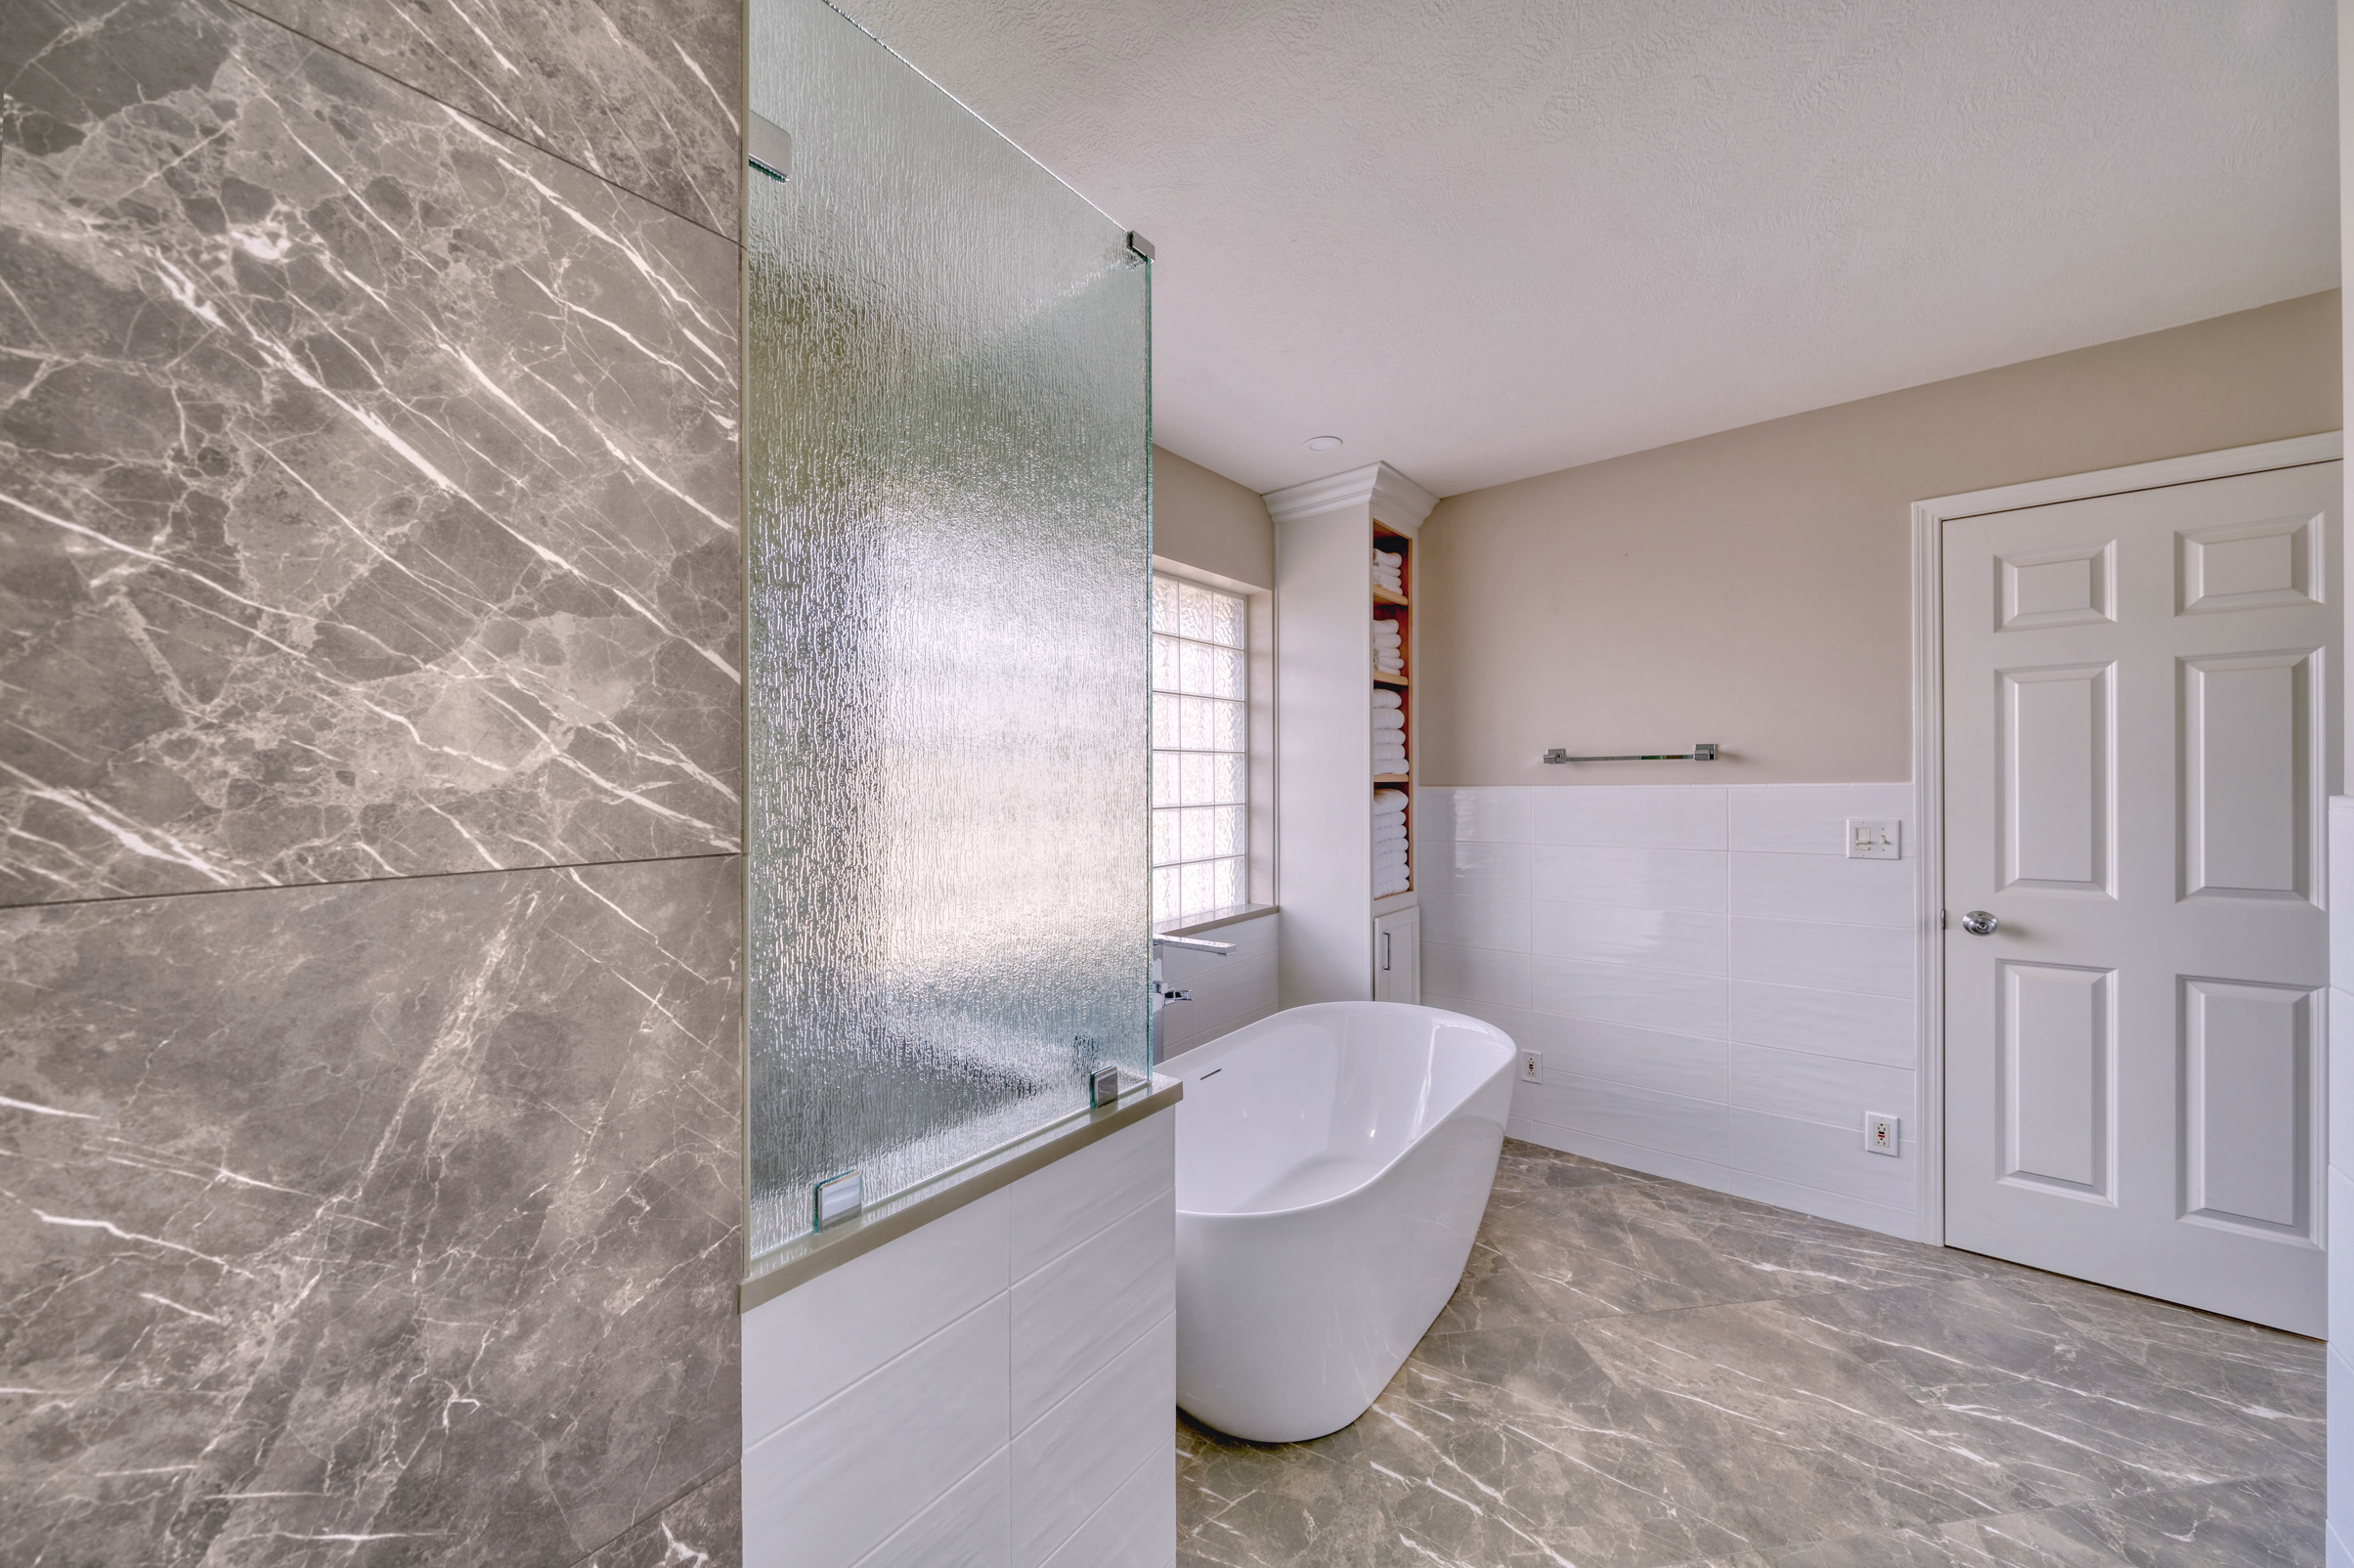 Remodeled bathroom with freestanding tub and walk-in shower. Gray tile floor, white tile on far wall.